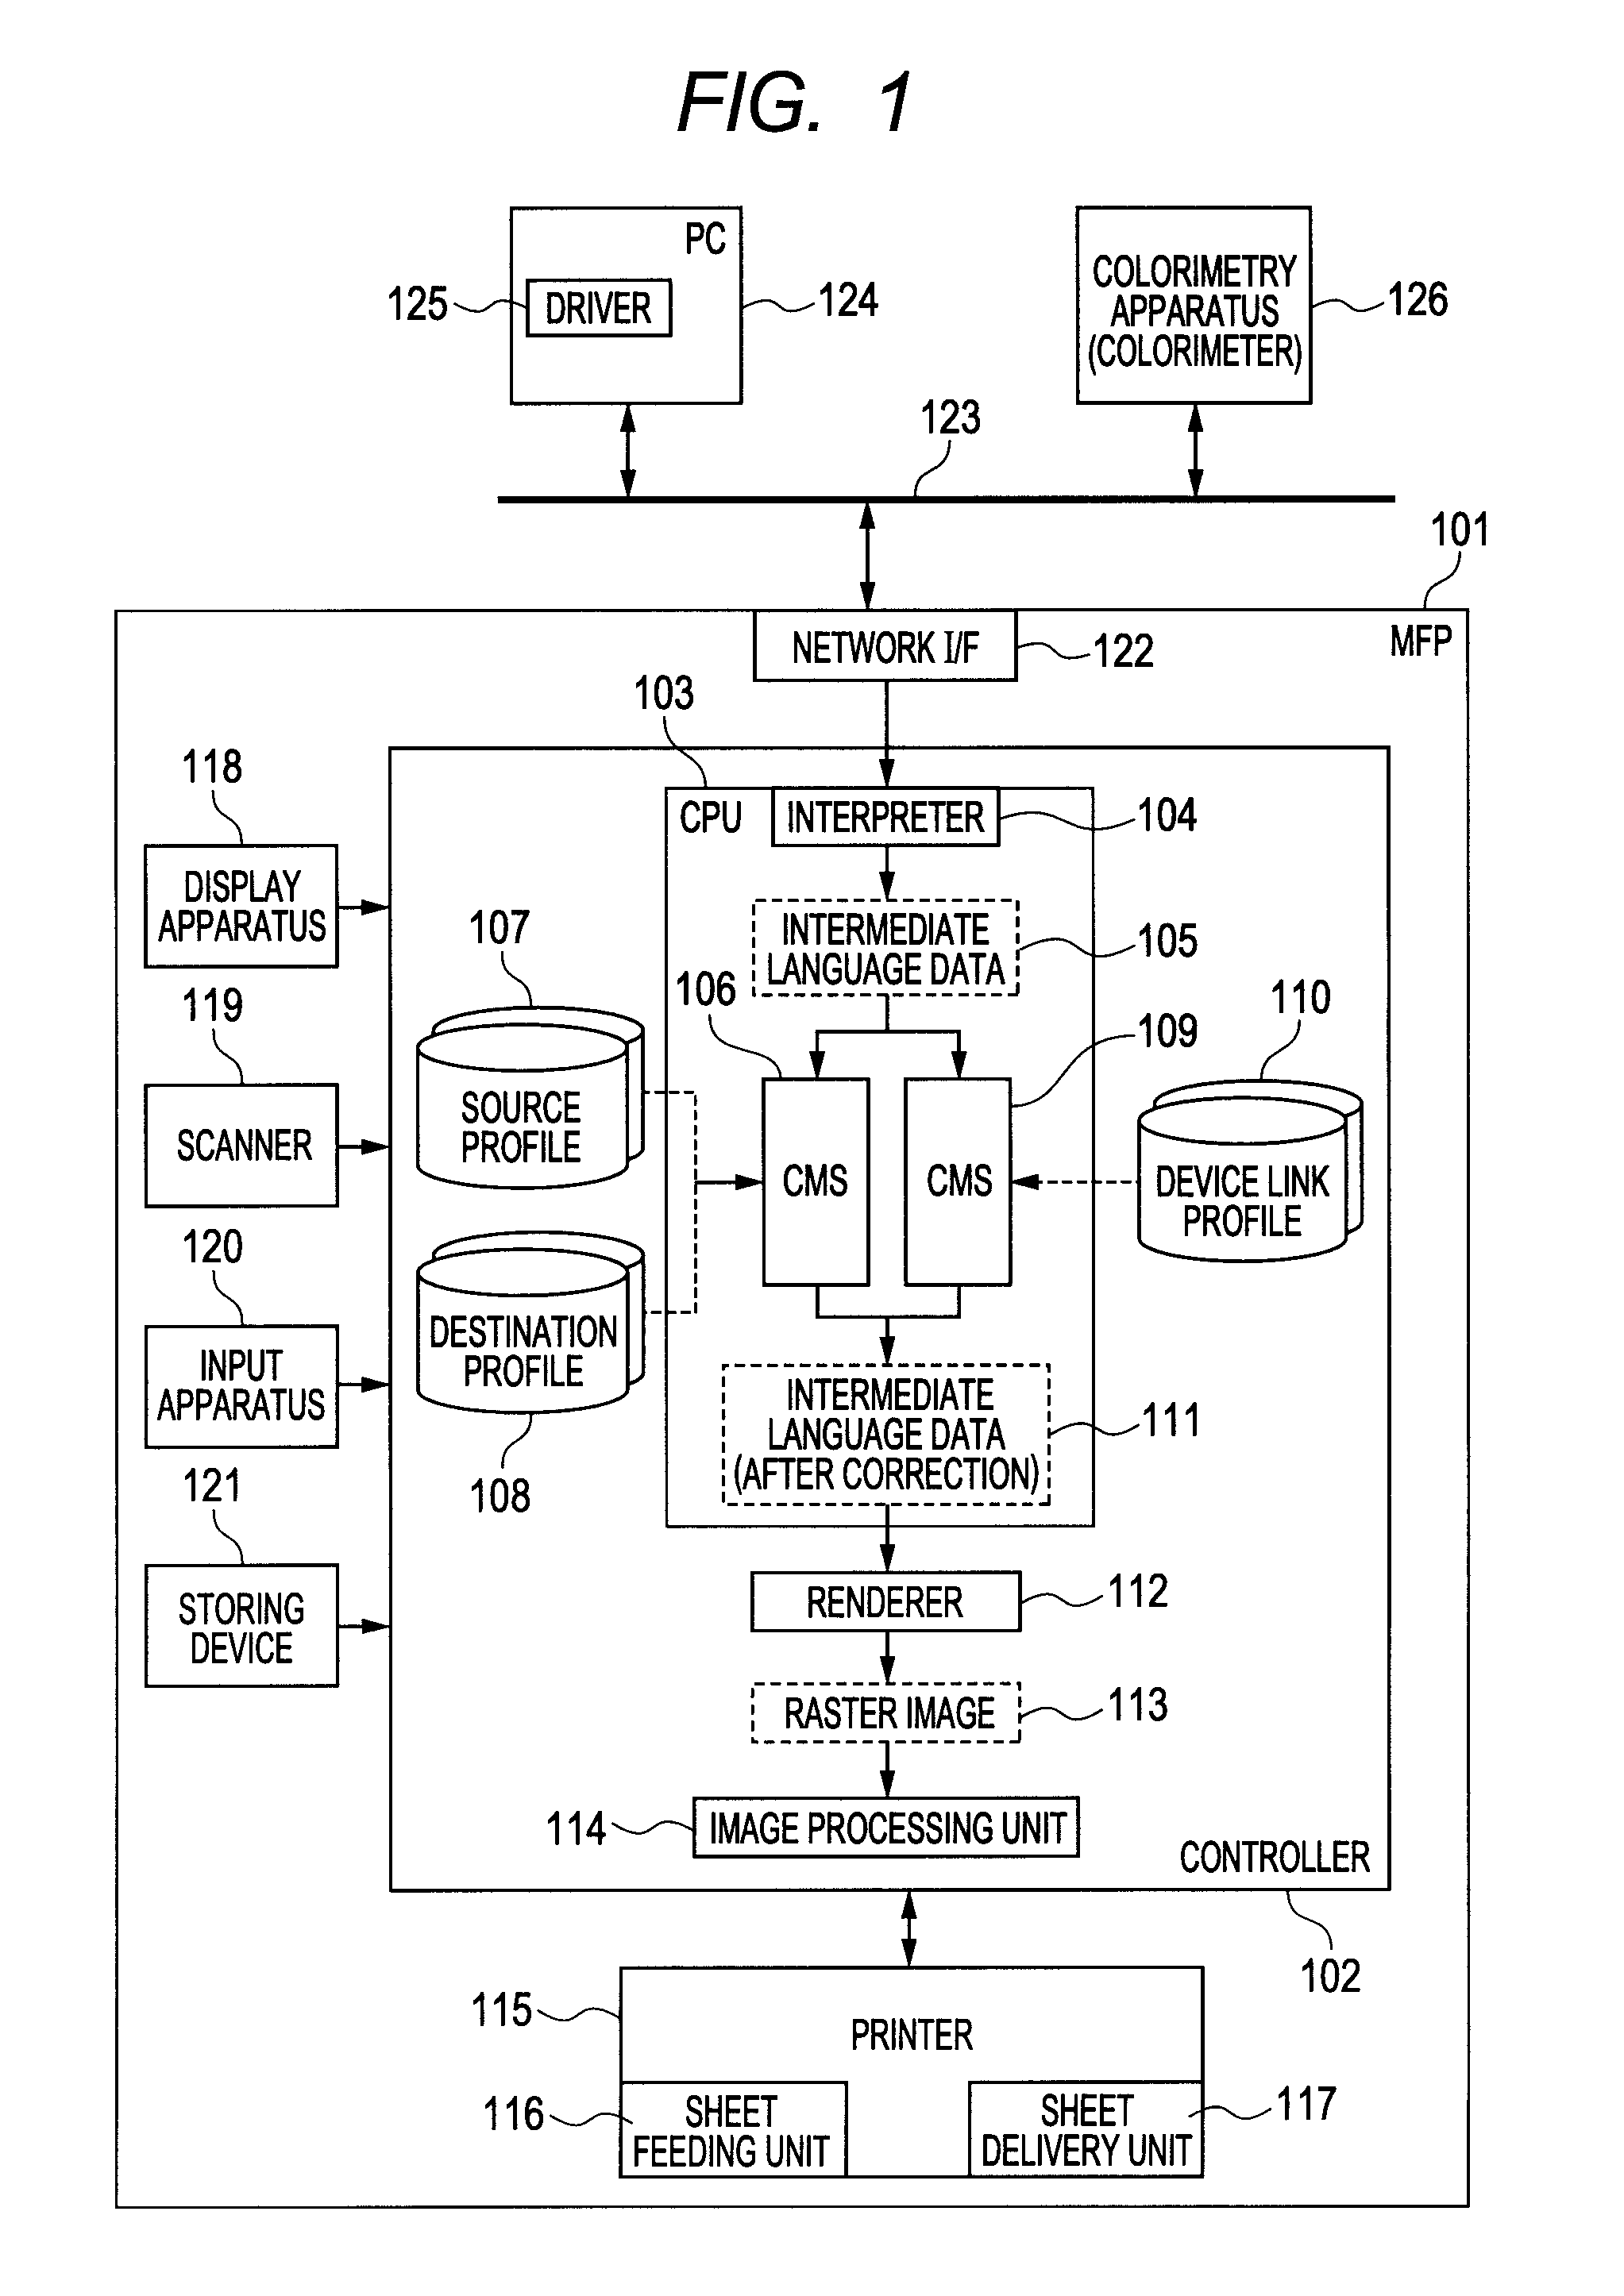 Image processing apparatus, image processing method, and program for executing the image processing method